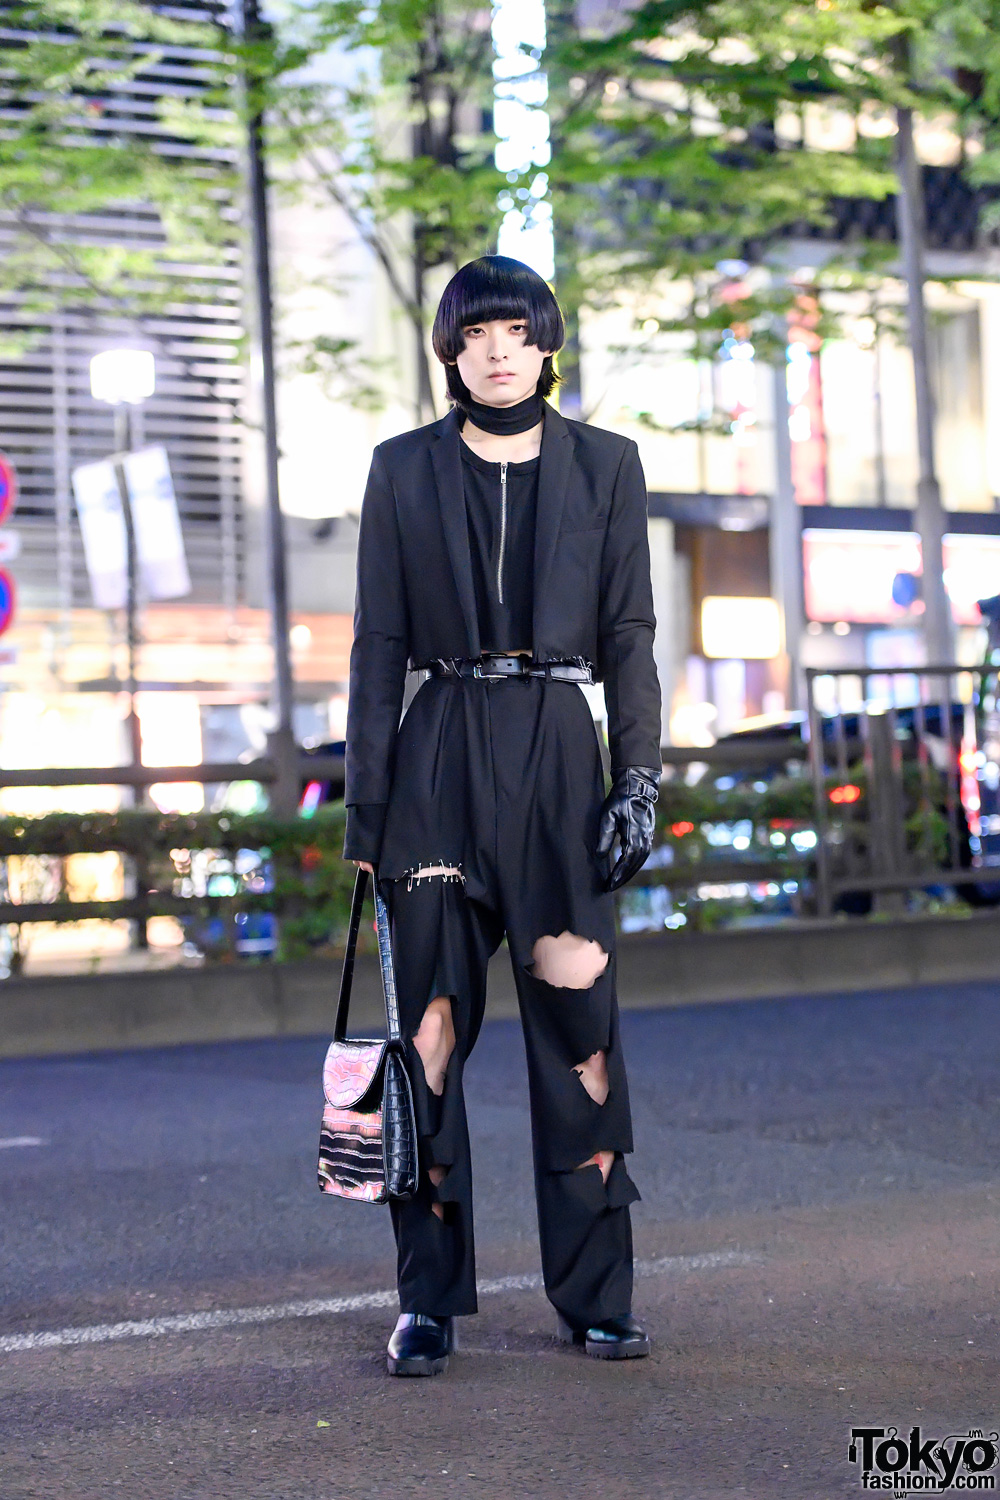 Harajuku Guy in Monochrome w/ Cool Hairstyle, Cropped Blazer, Cutout Fekete Pants, Single Leather Glove, Open The Door & Boots